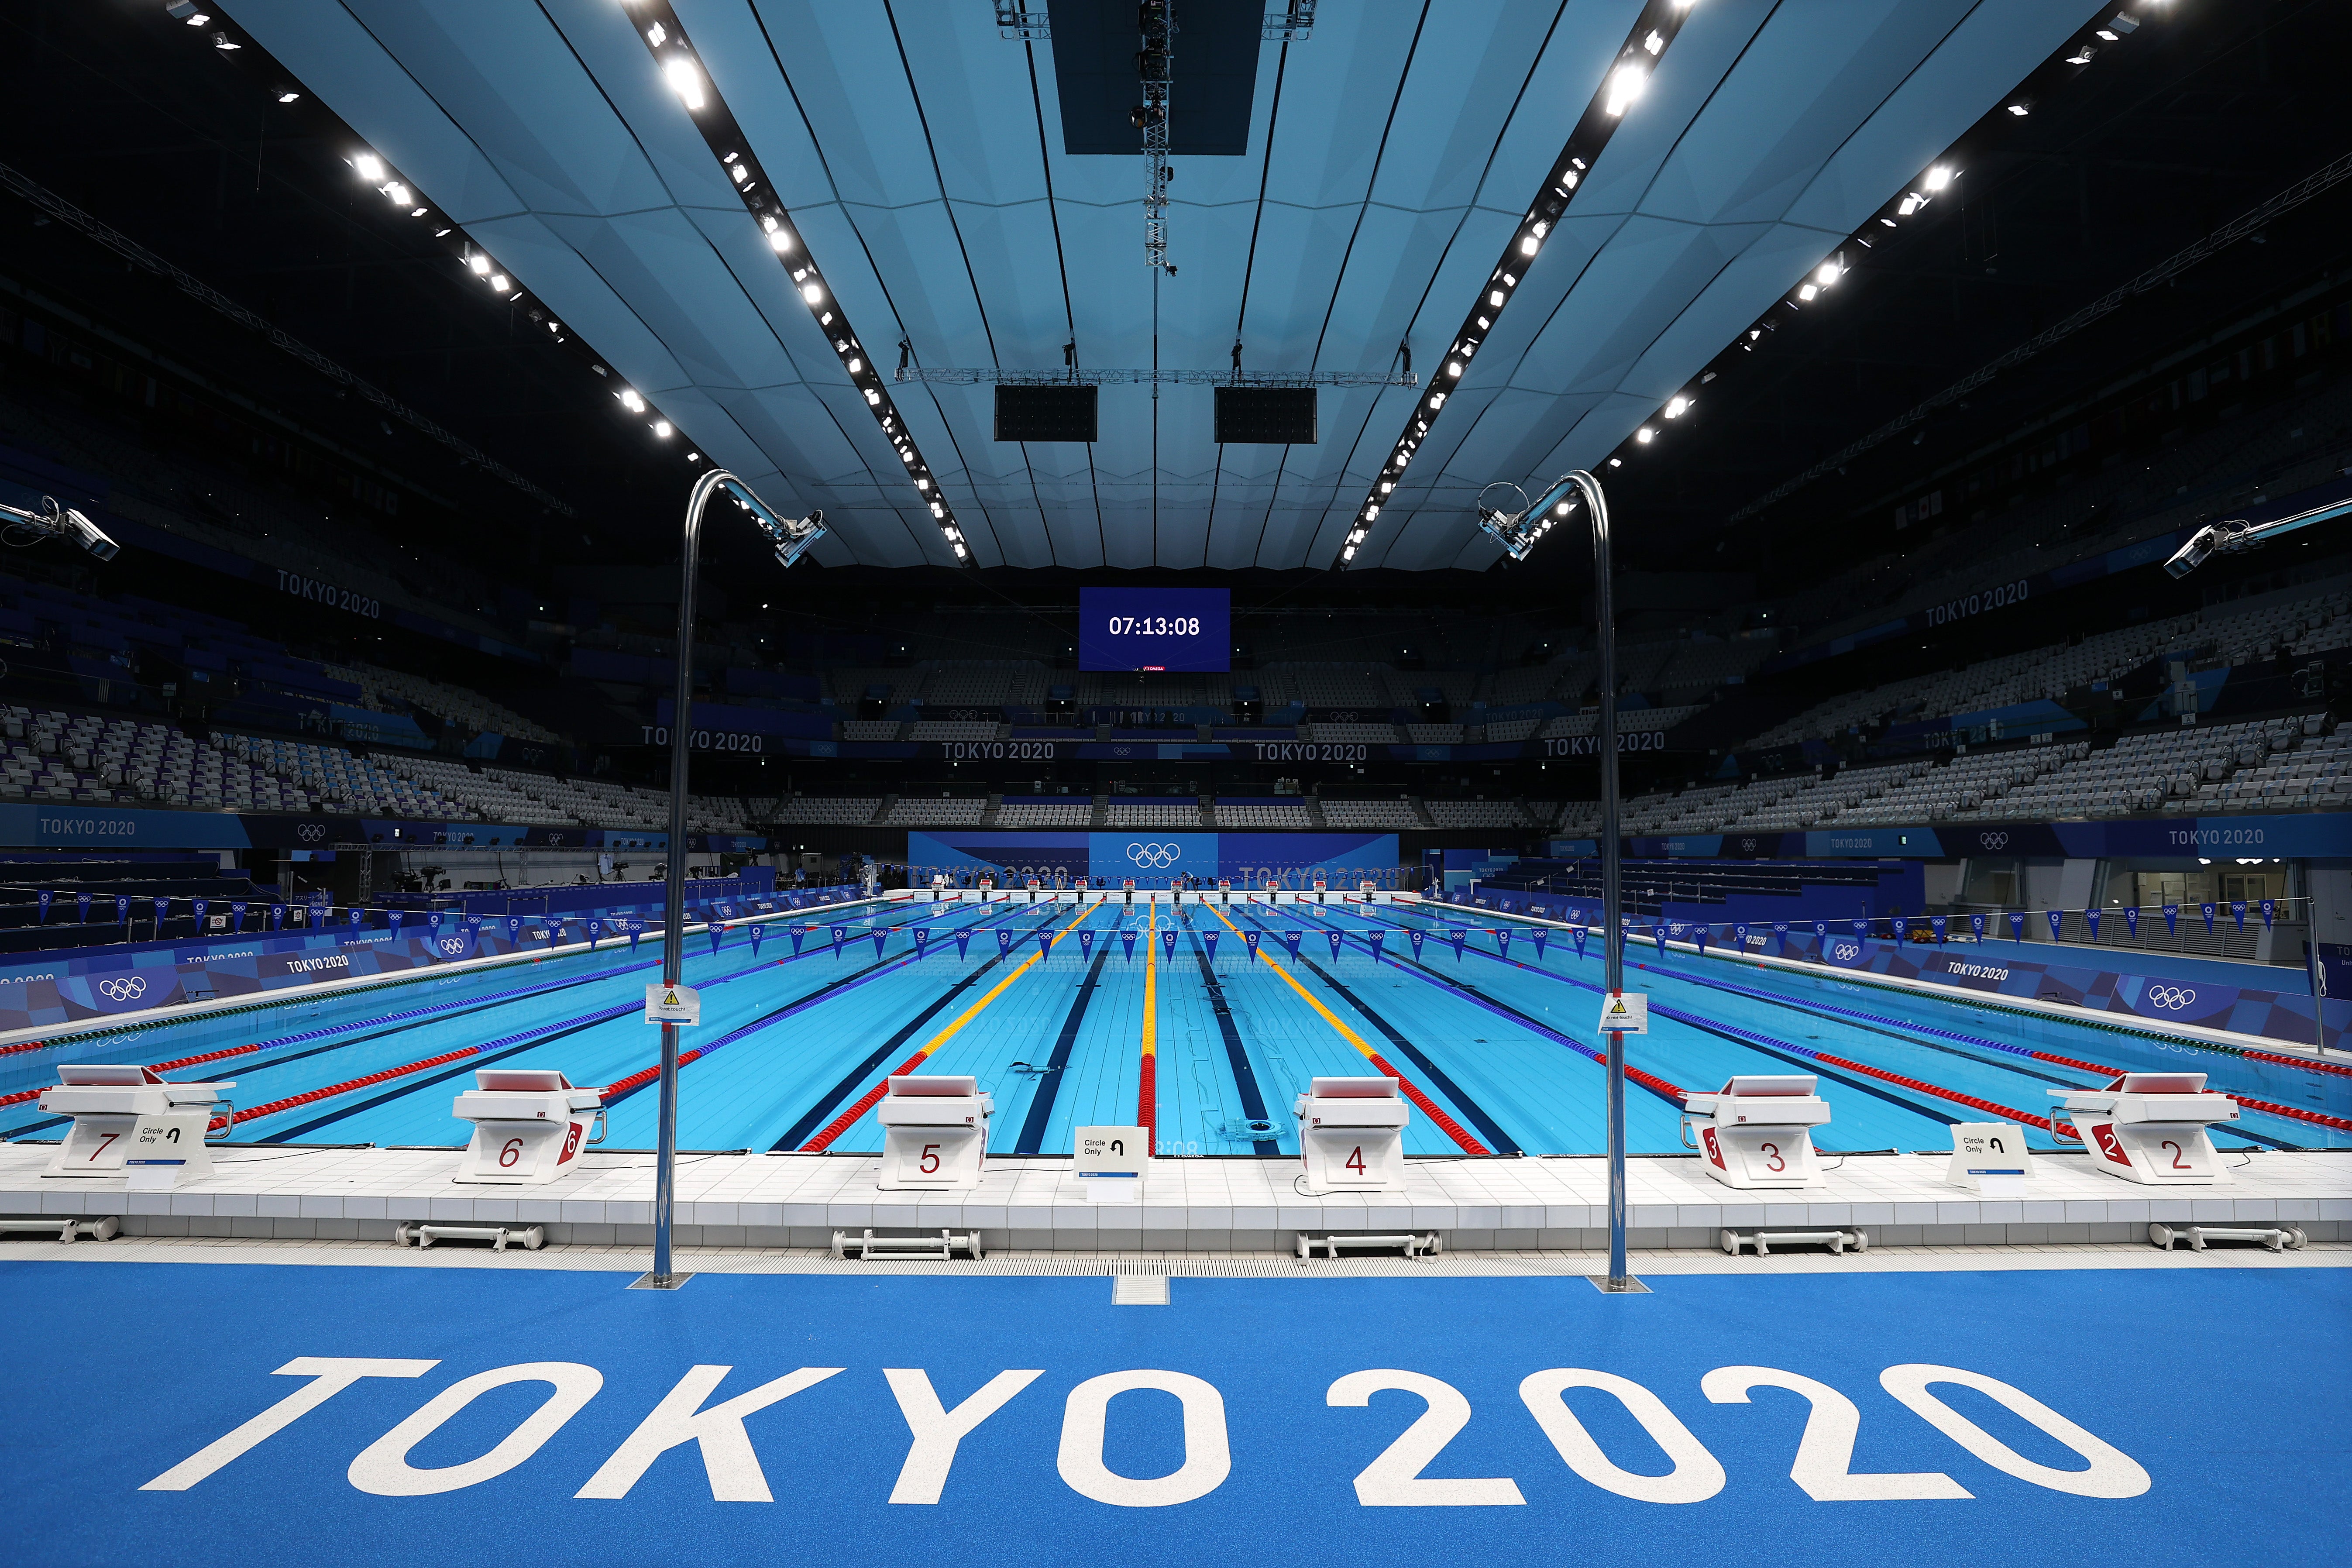 The events being called into question took place during Tokyo 2020